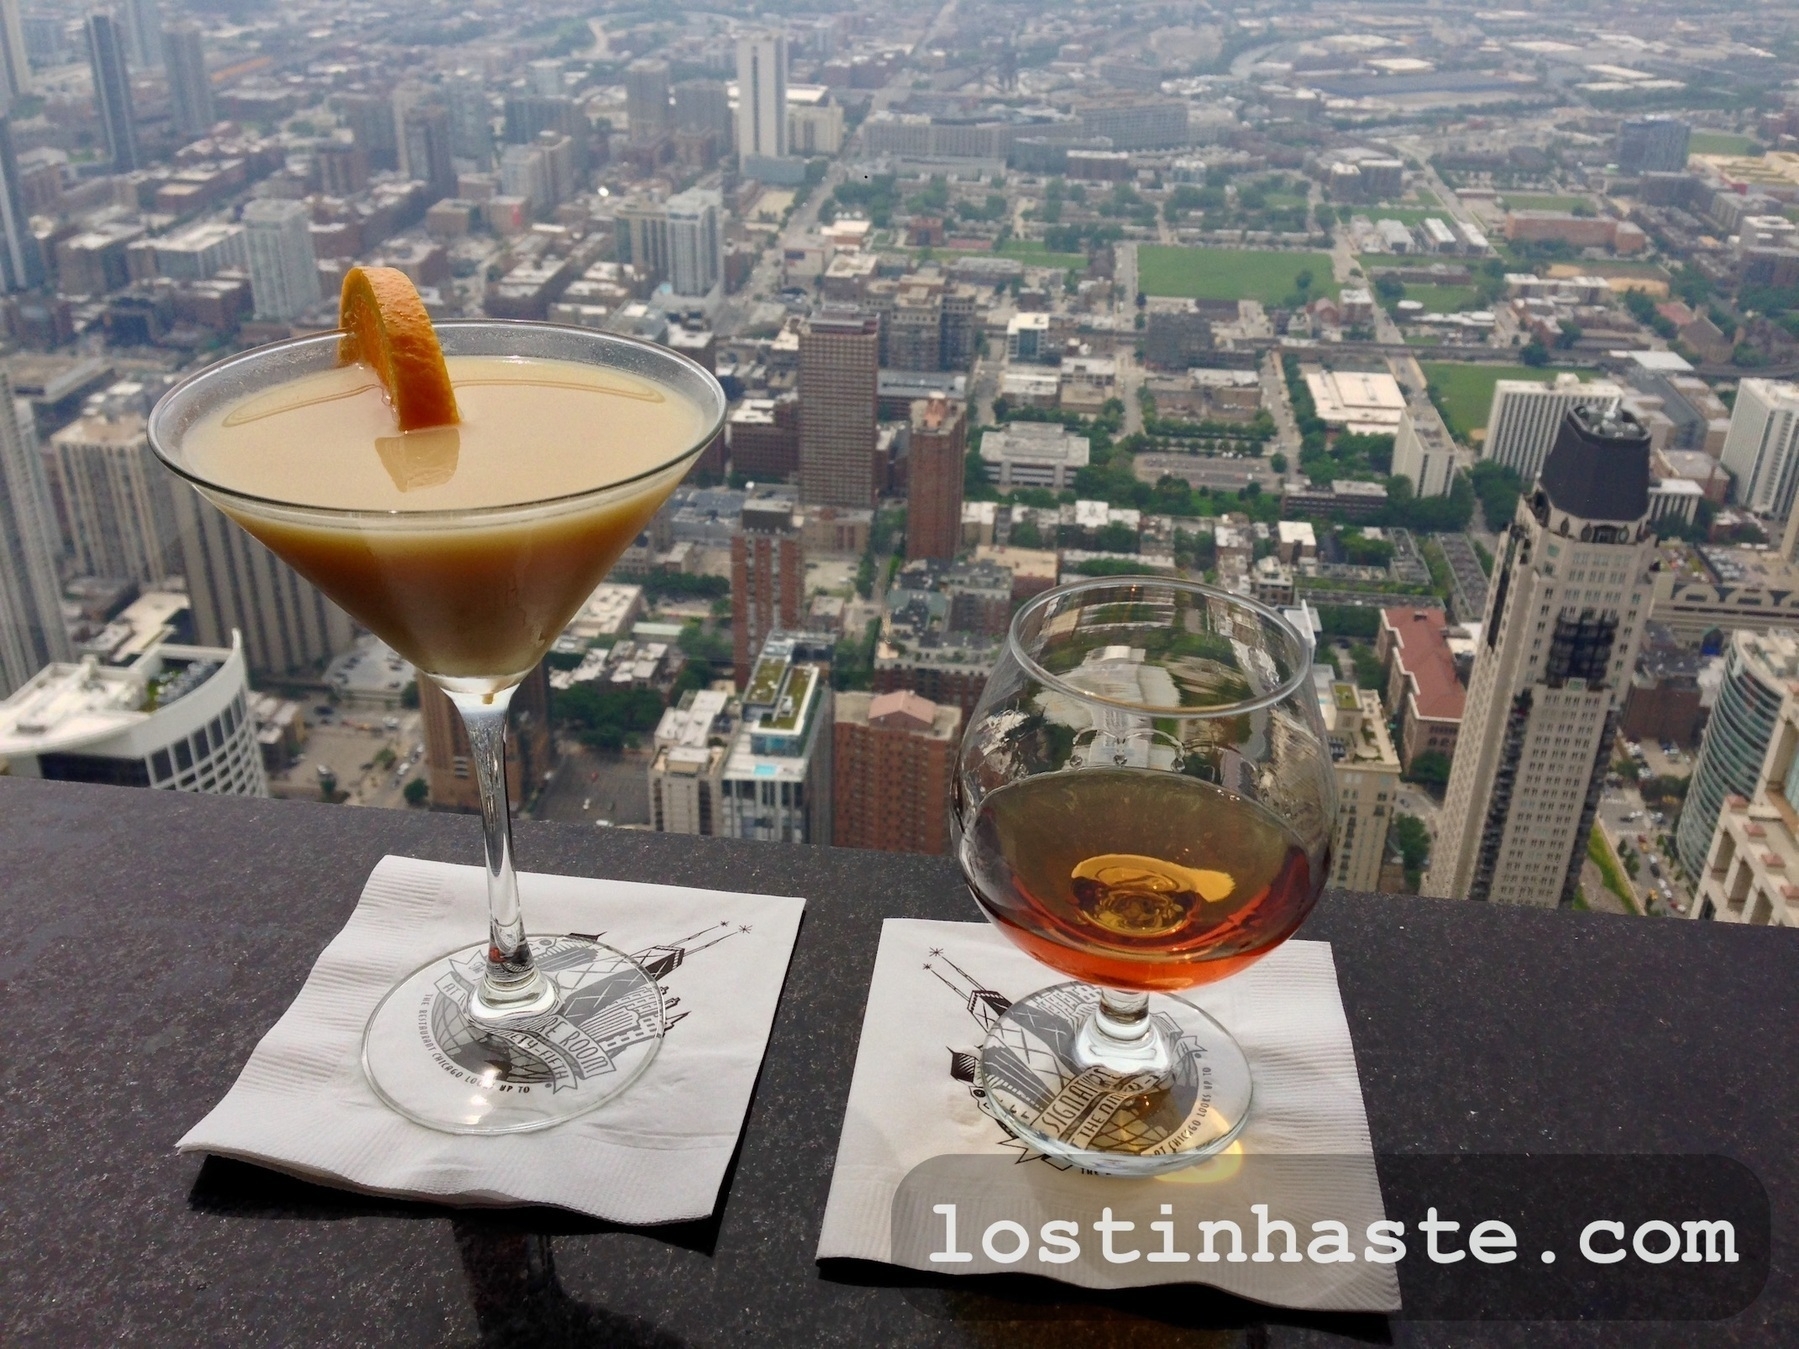 Two drinks on napkins overlook a dense cityscape from a high vantage point. Text: 'lostinhaste.com'